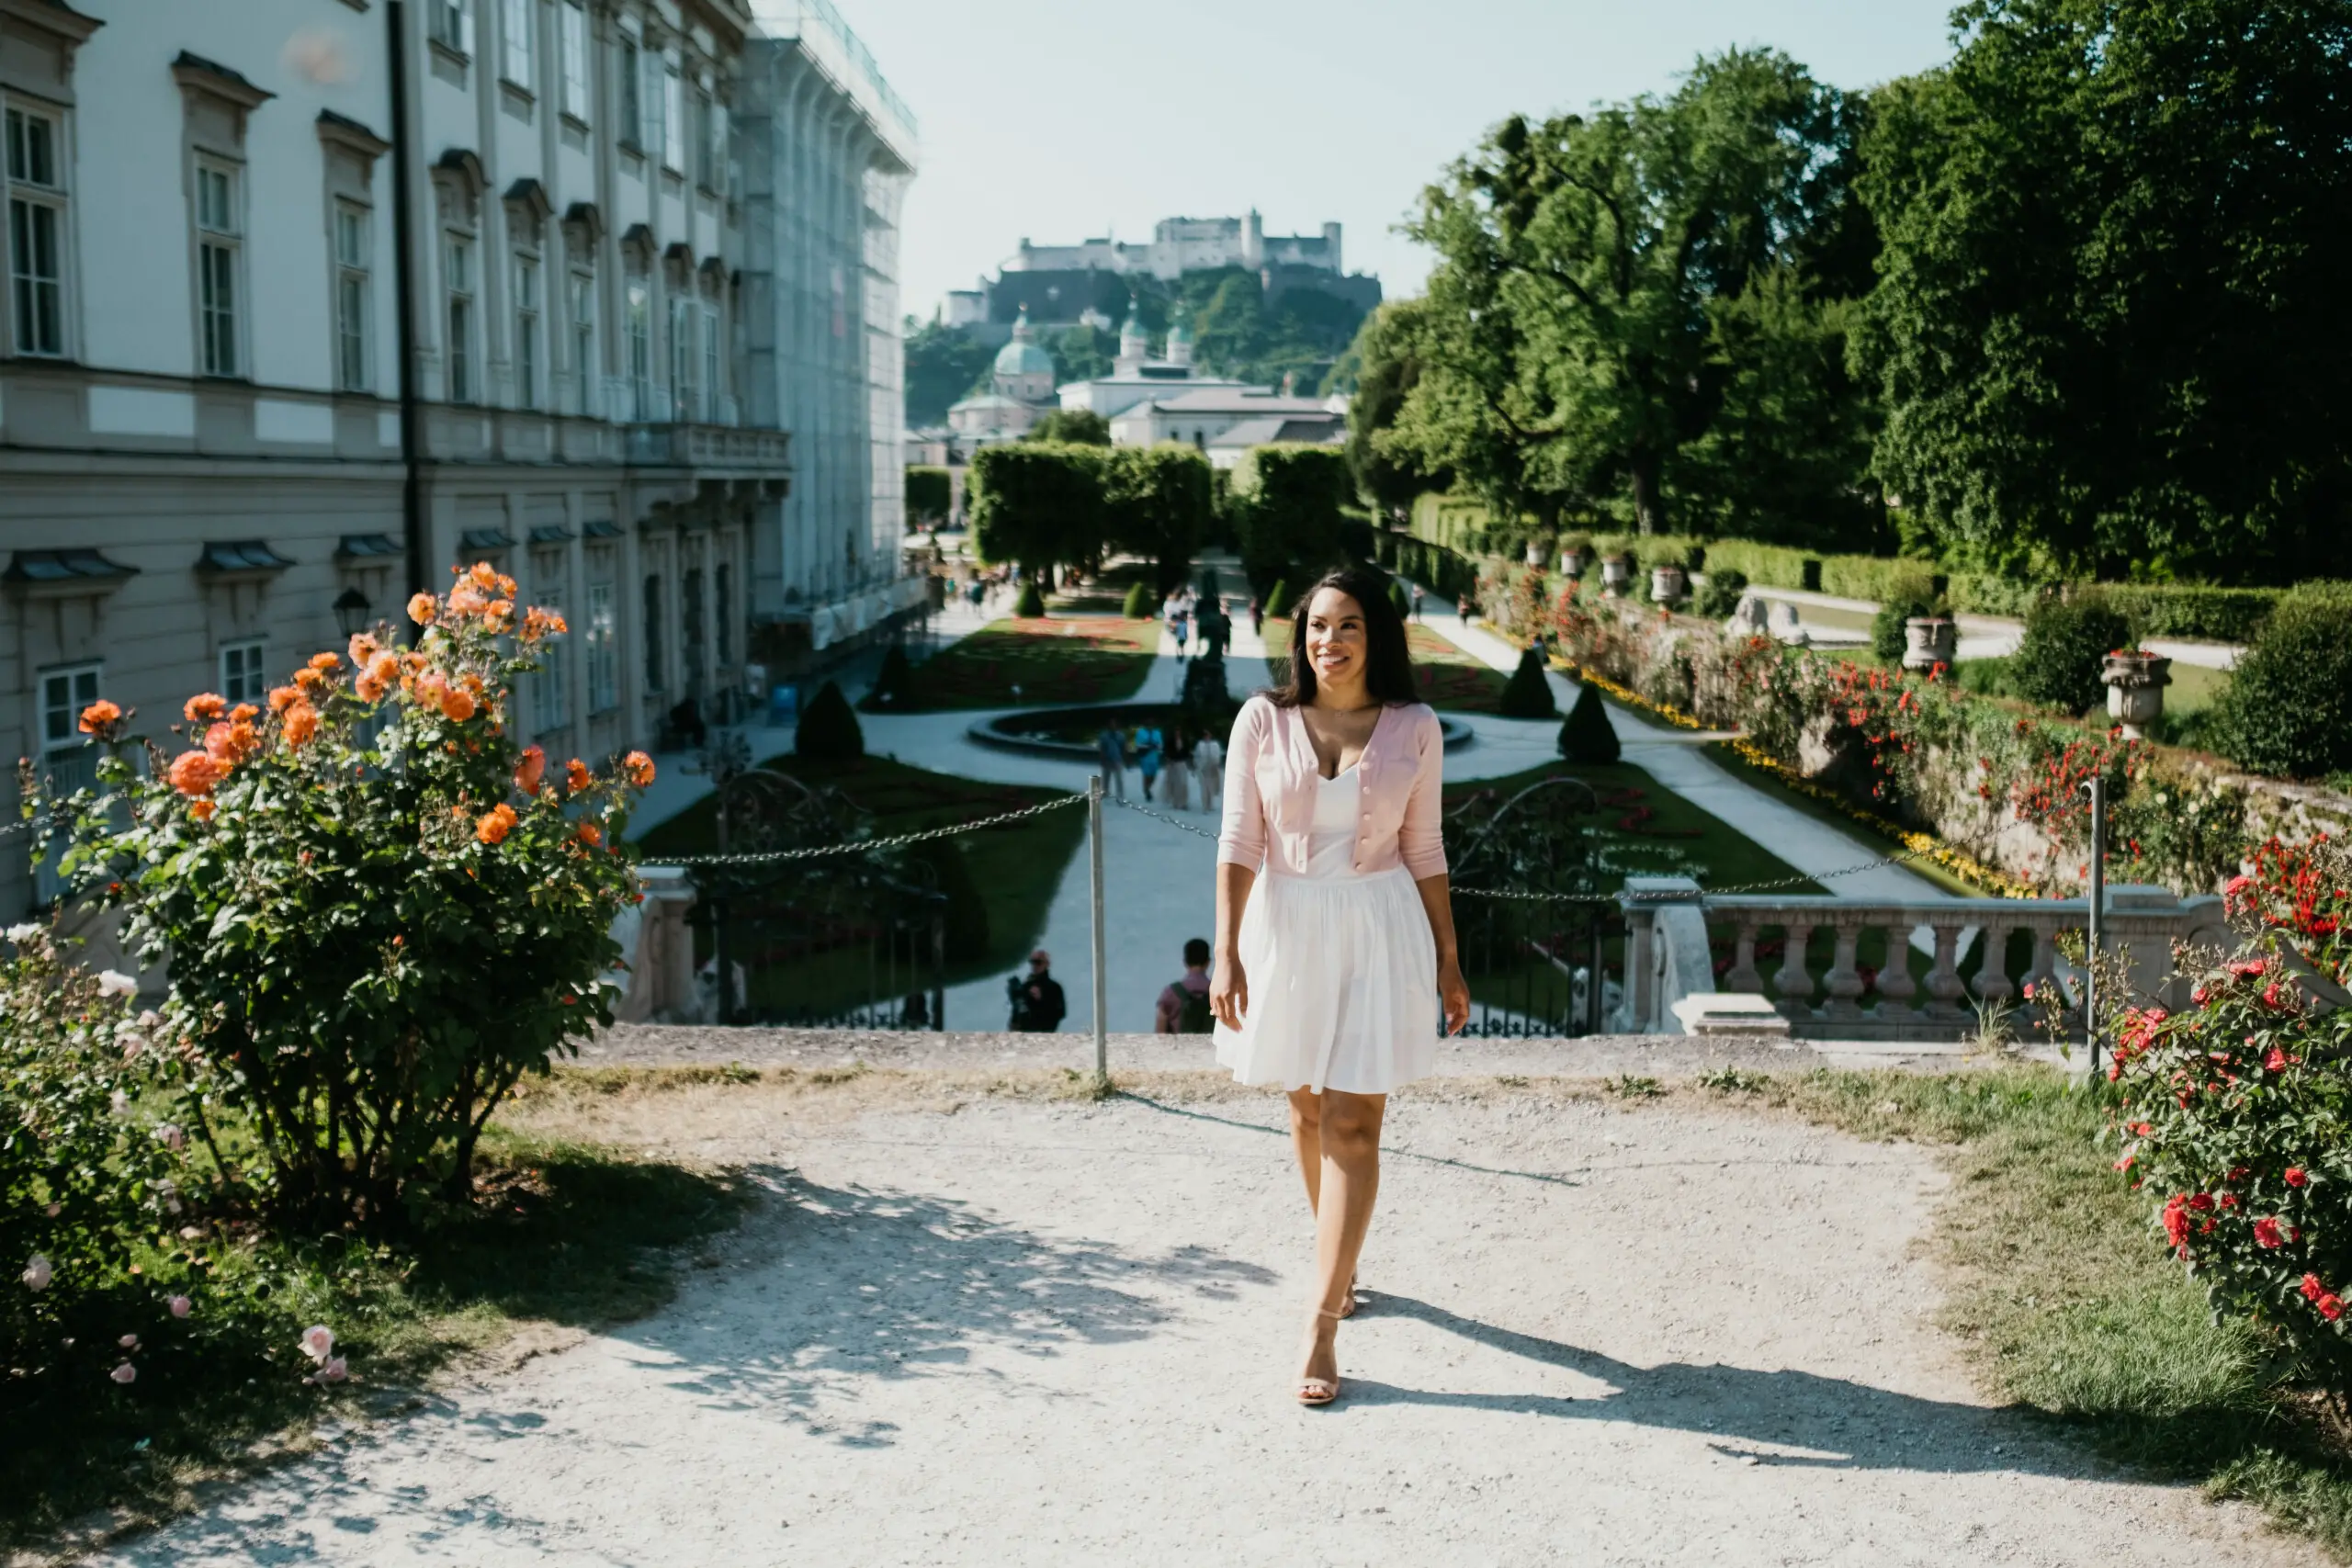 Solo photoshoot by Kevin, Localgrapher in Salzburg